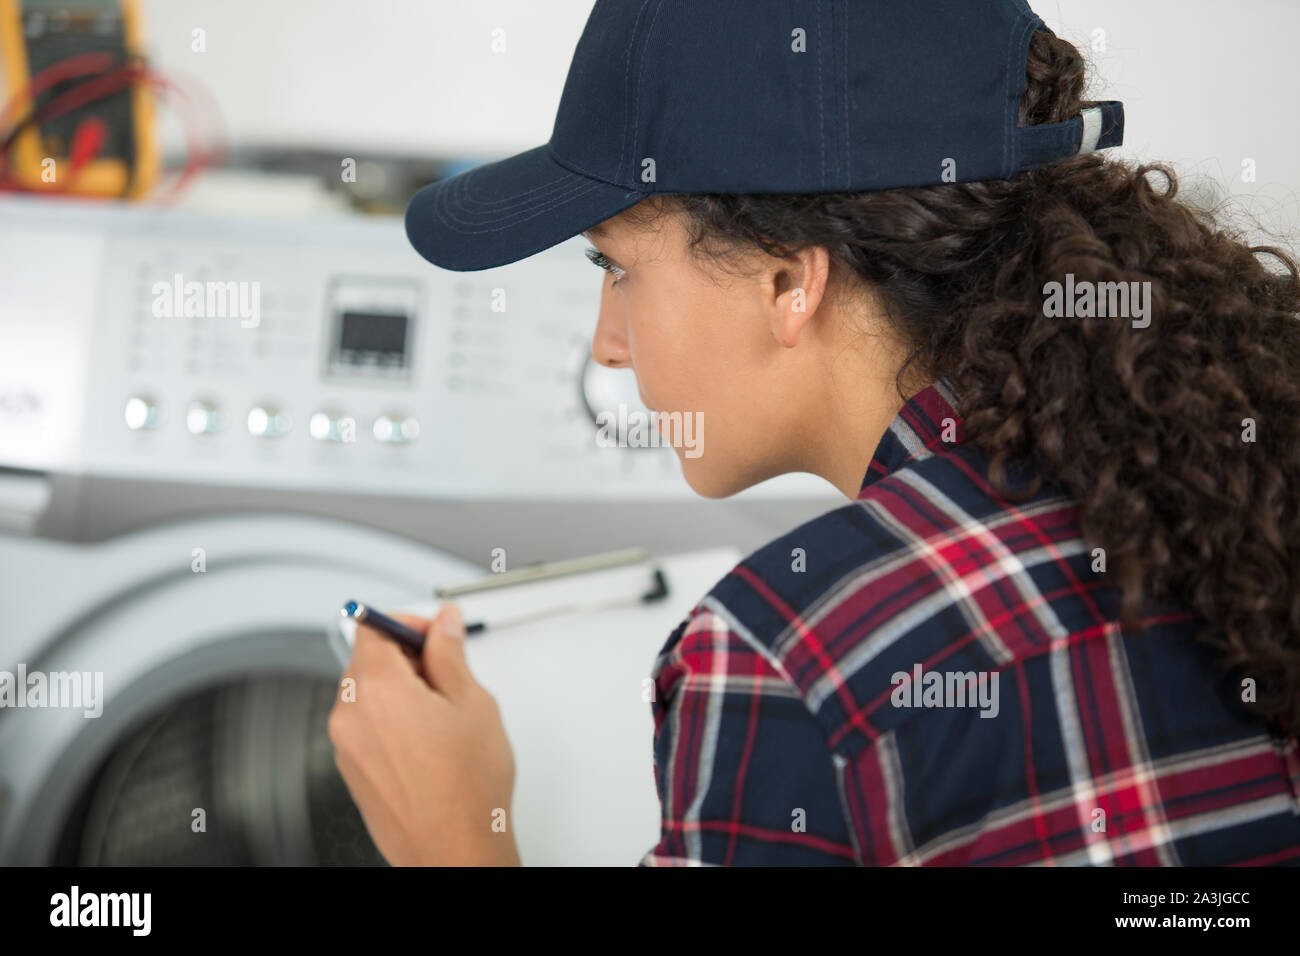 servicewoman with clipboard looking at washing machine Stock Photo